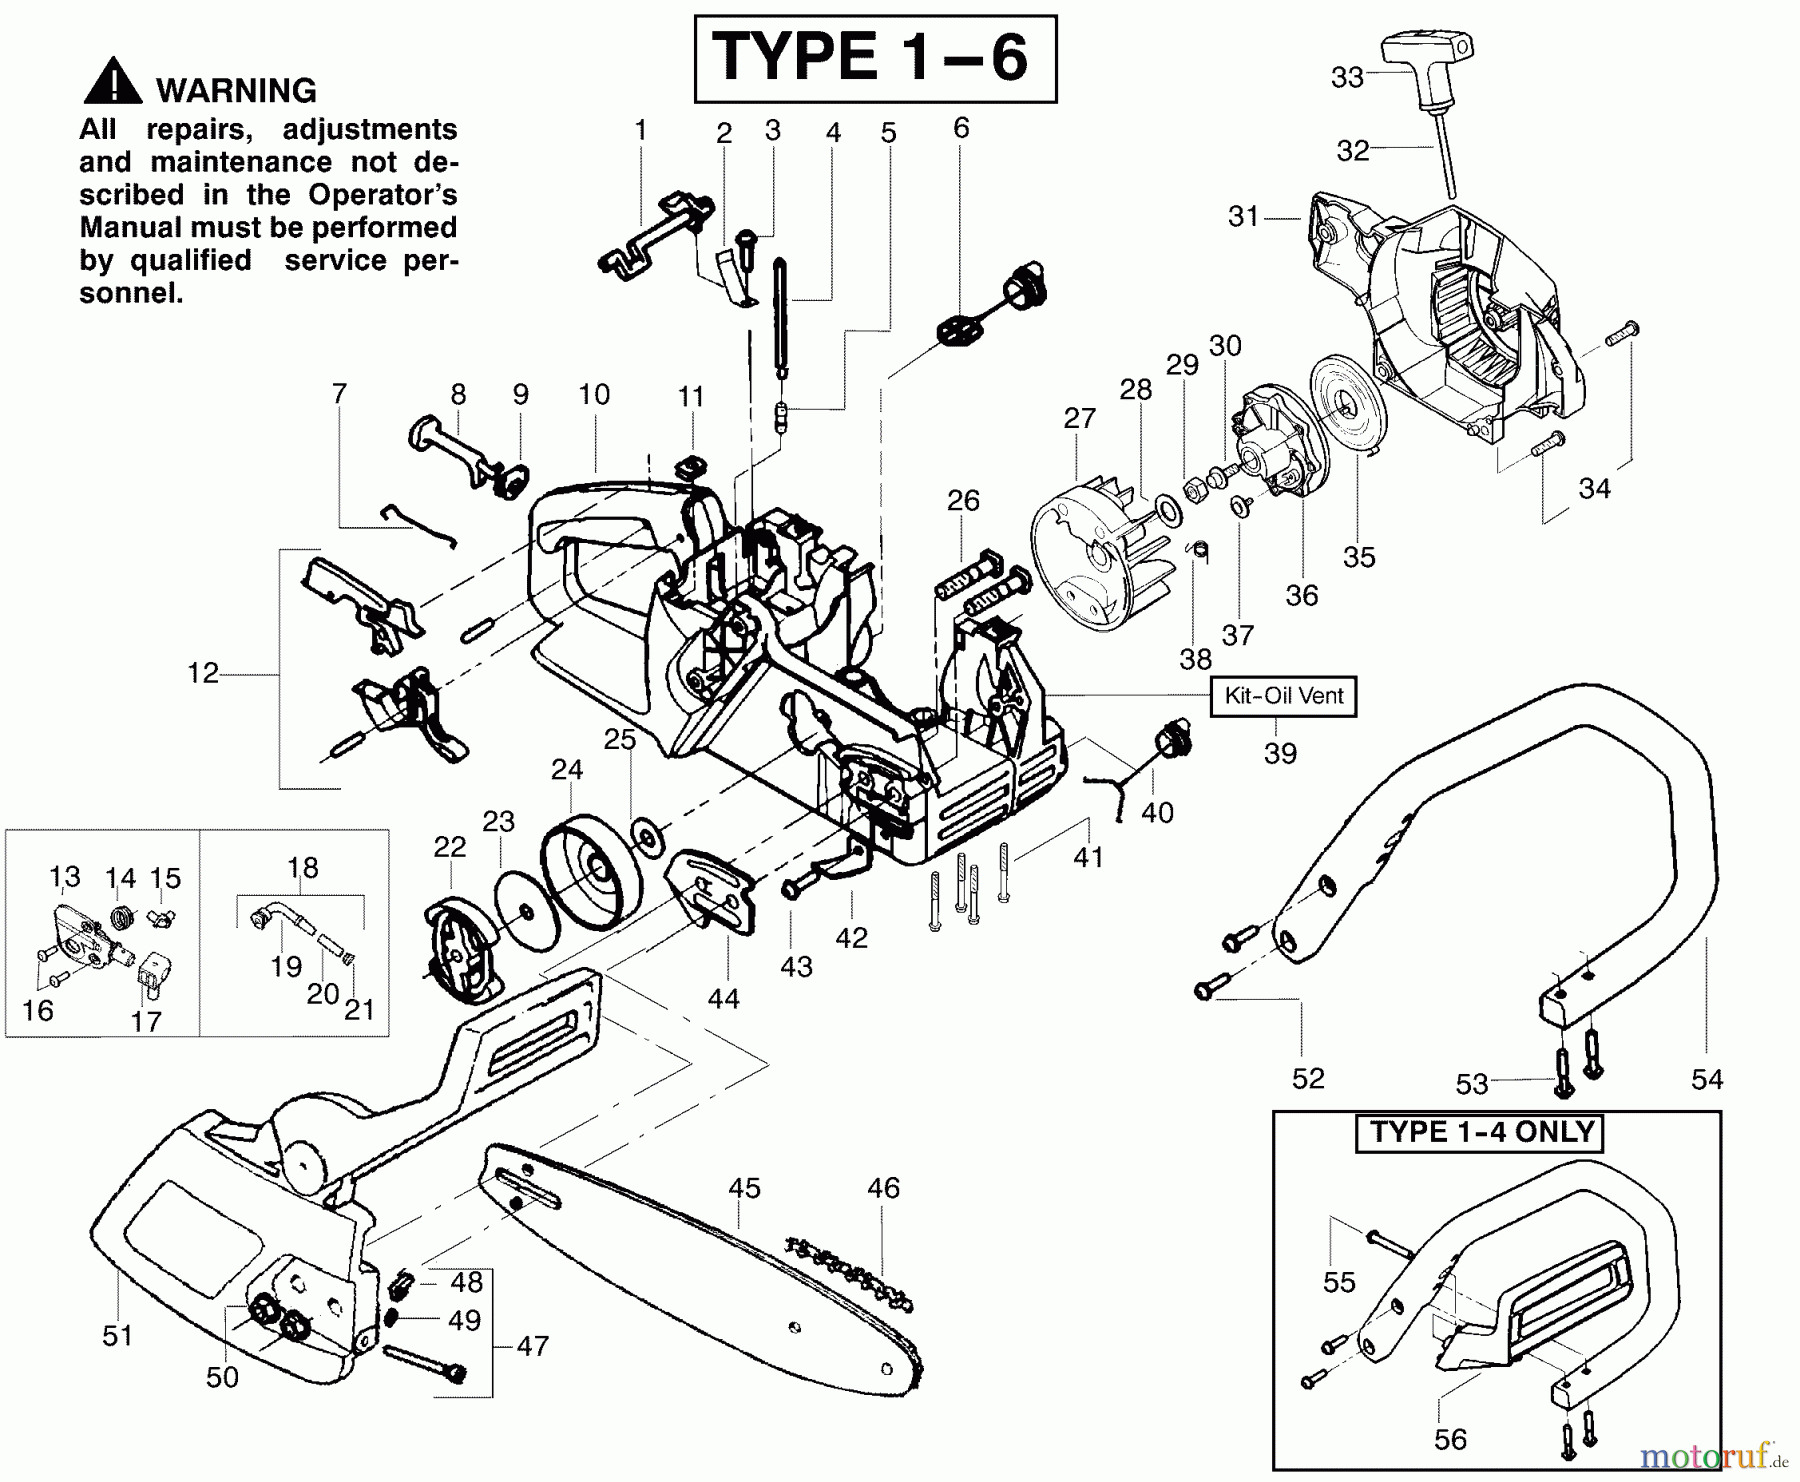  Poulan / Weed Eater Motorsägen 1950 (Type 1) - Poulan Woodshark Chainsaw Chassis & Bar Assembly Type 1-6